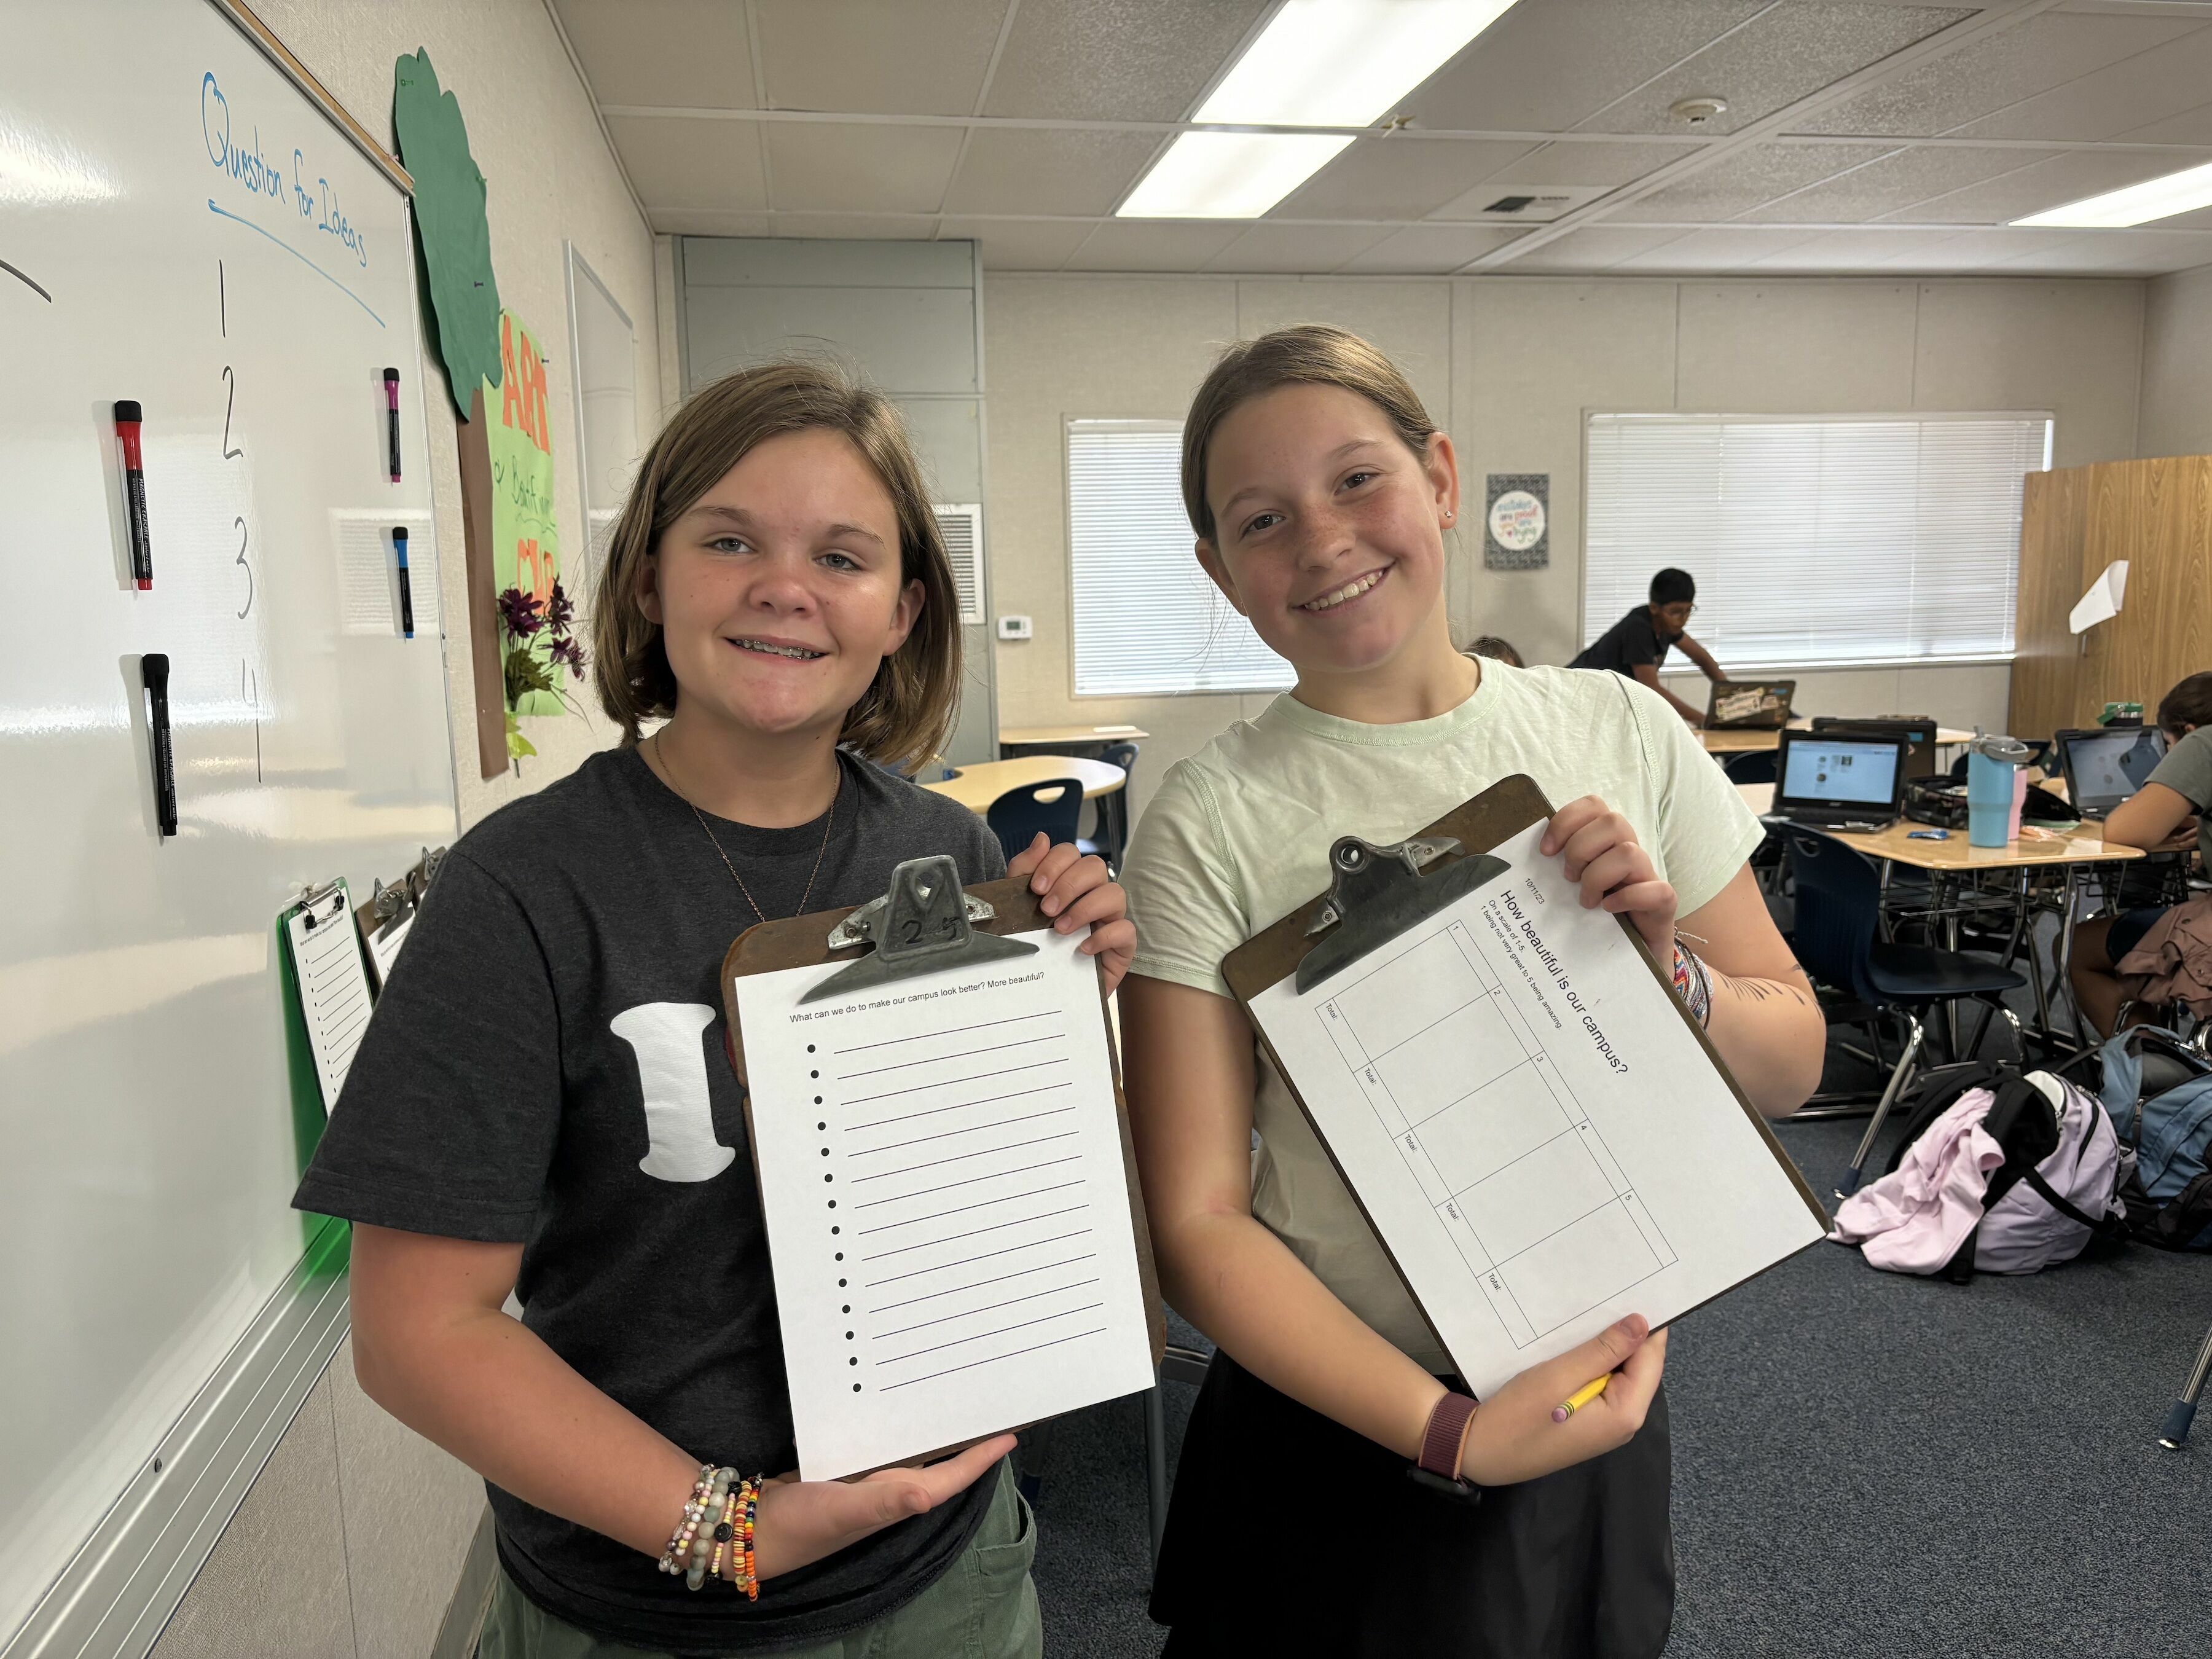 two pre-teen girls standing beside each other, smiling, and holding clipboards showing the forms they used to collect feedback from fellow students about campus beautification